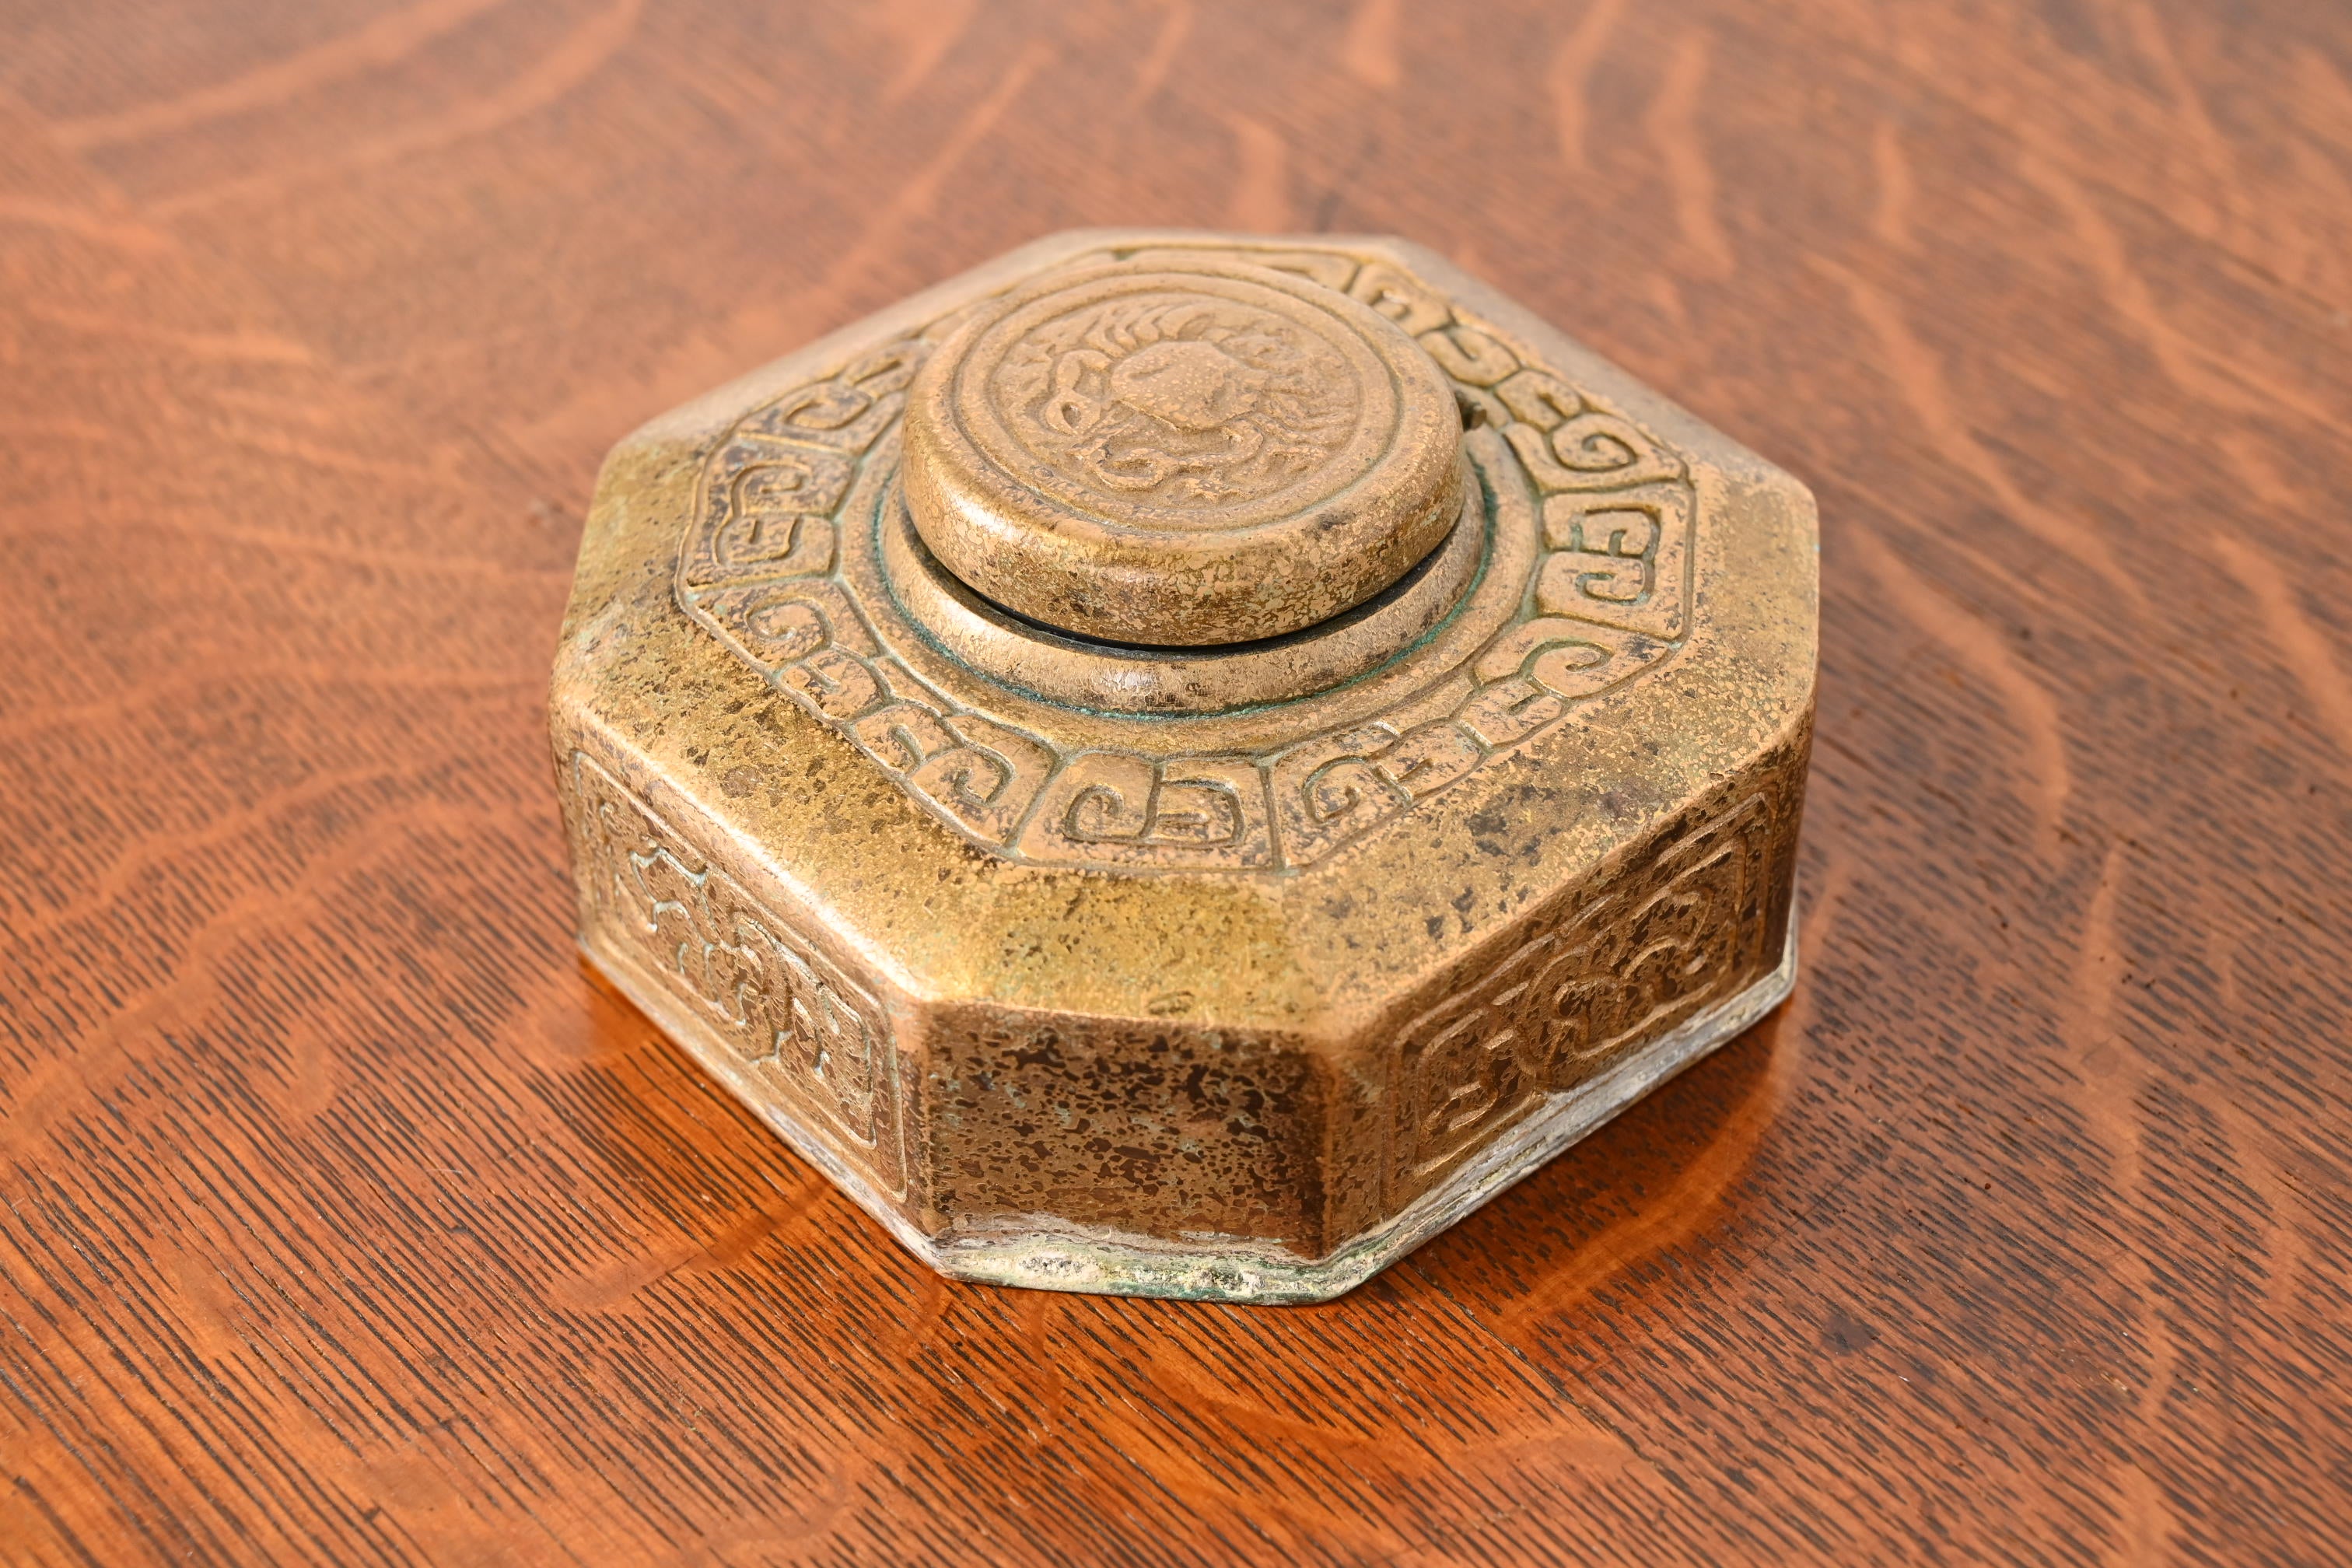 Tiffany Studios New York Zodiac Bronze Doré Inkwell In Good Condition For Sale In South Bend, IN